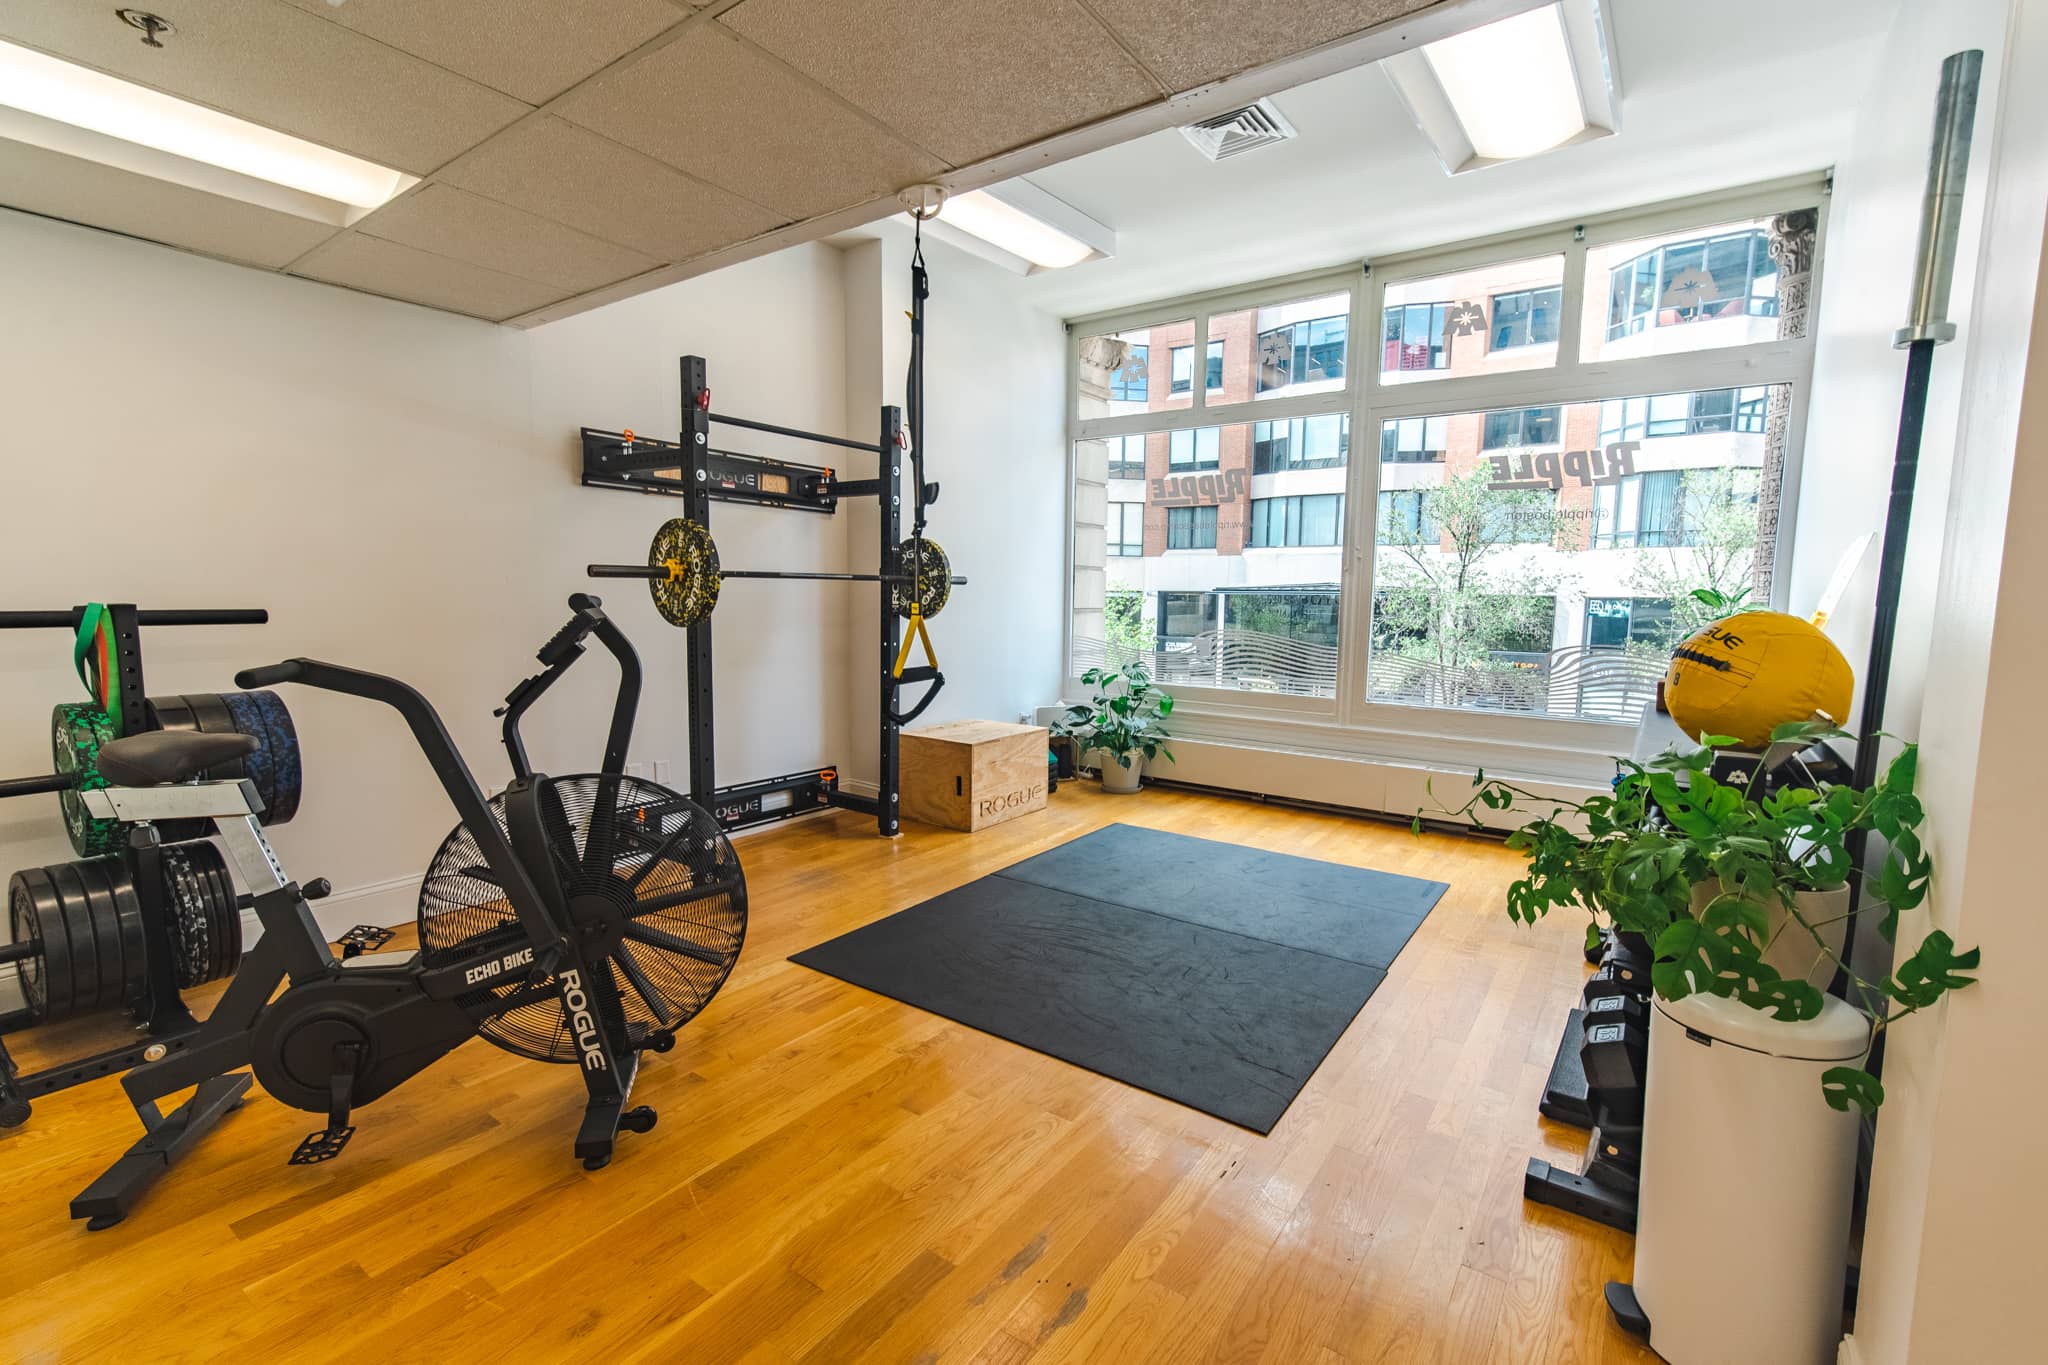 Ripple Boston Physical Therapy Gym